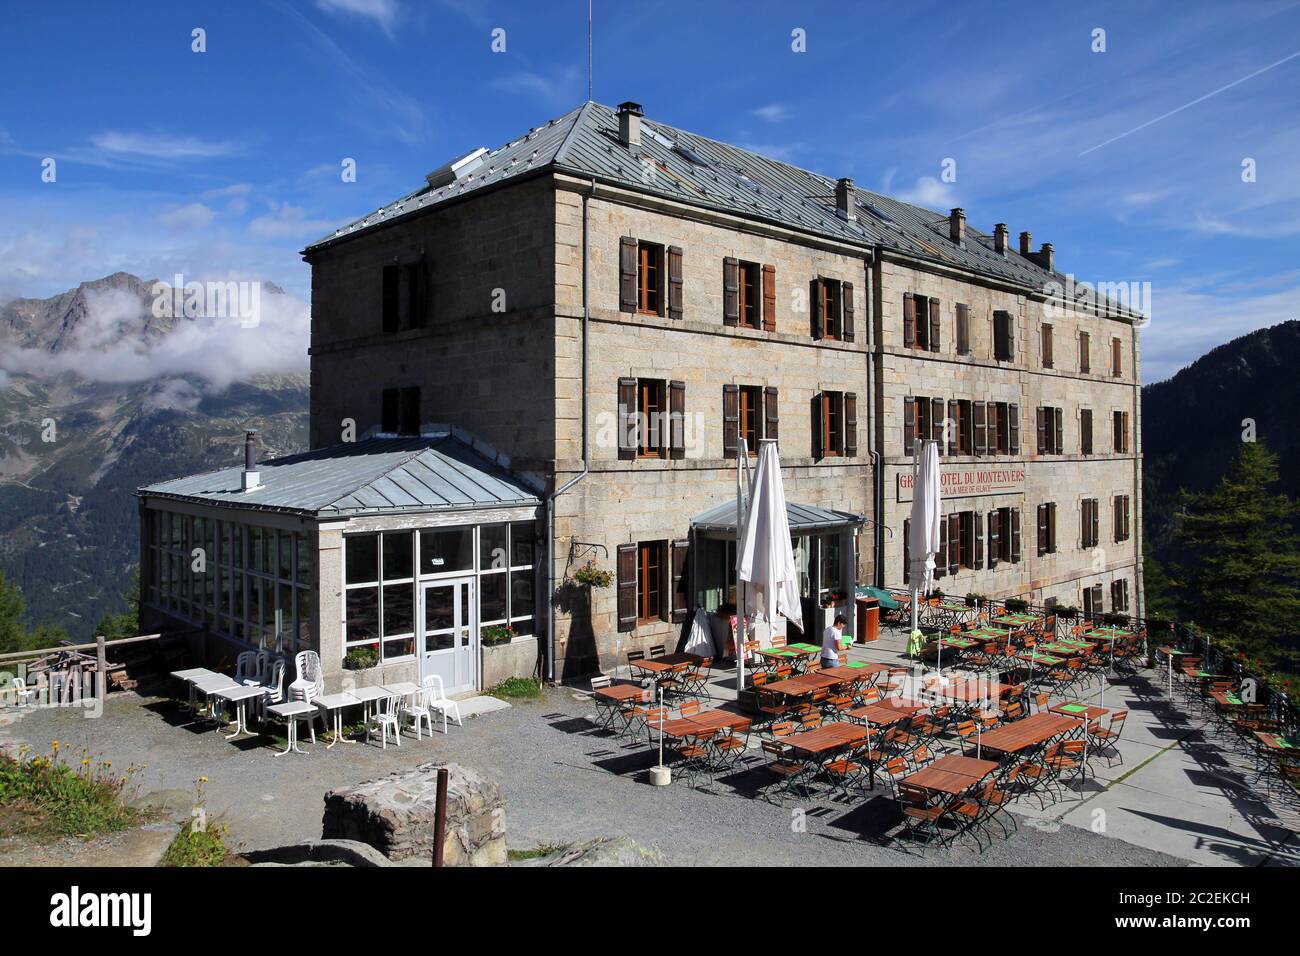 Chamonix France August 8 The Historic Grand Hotel De Montenvers Above Chamonix France Preparing For Breakfeast And For The Incomming Wave Of Tour Stock Photo Alamy